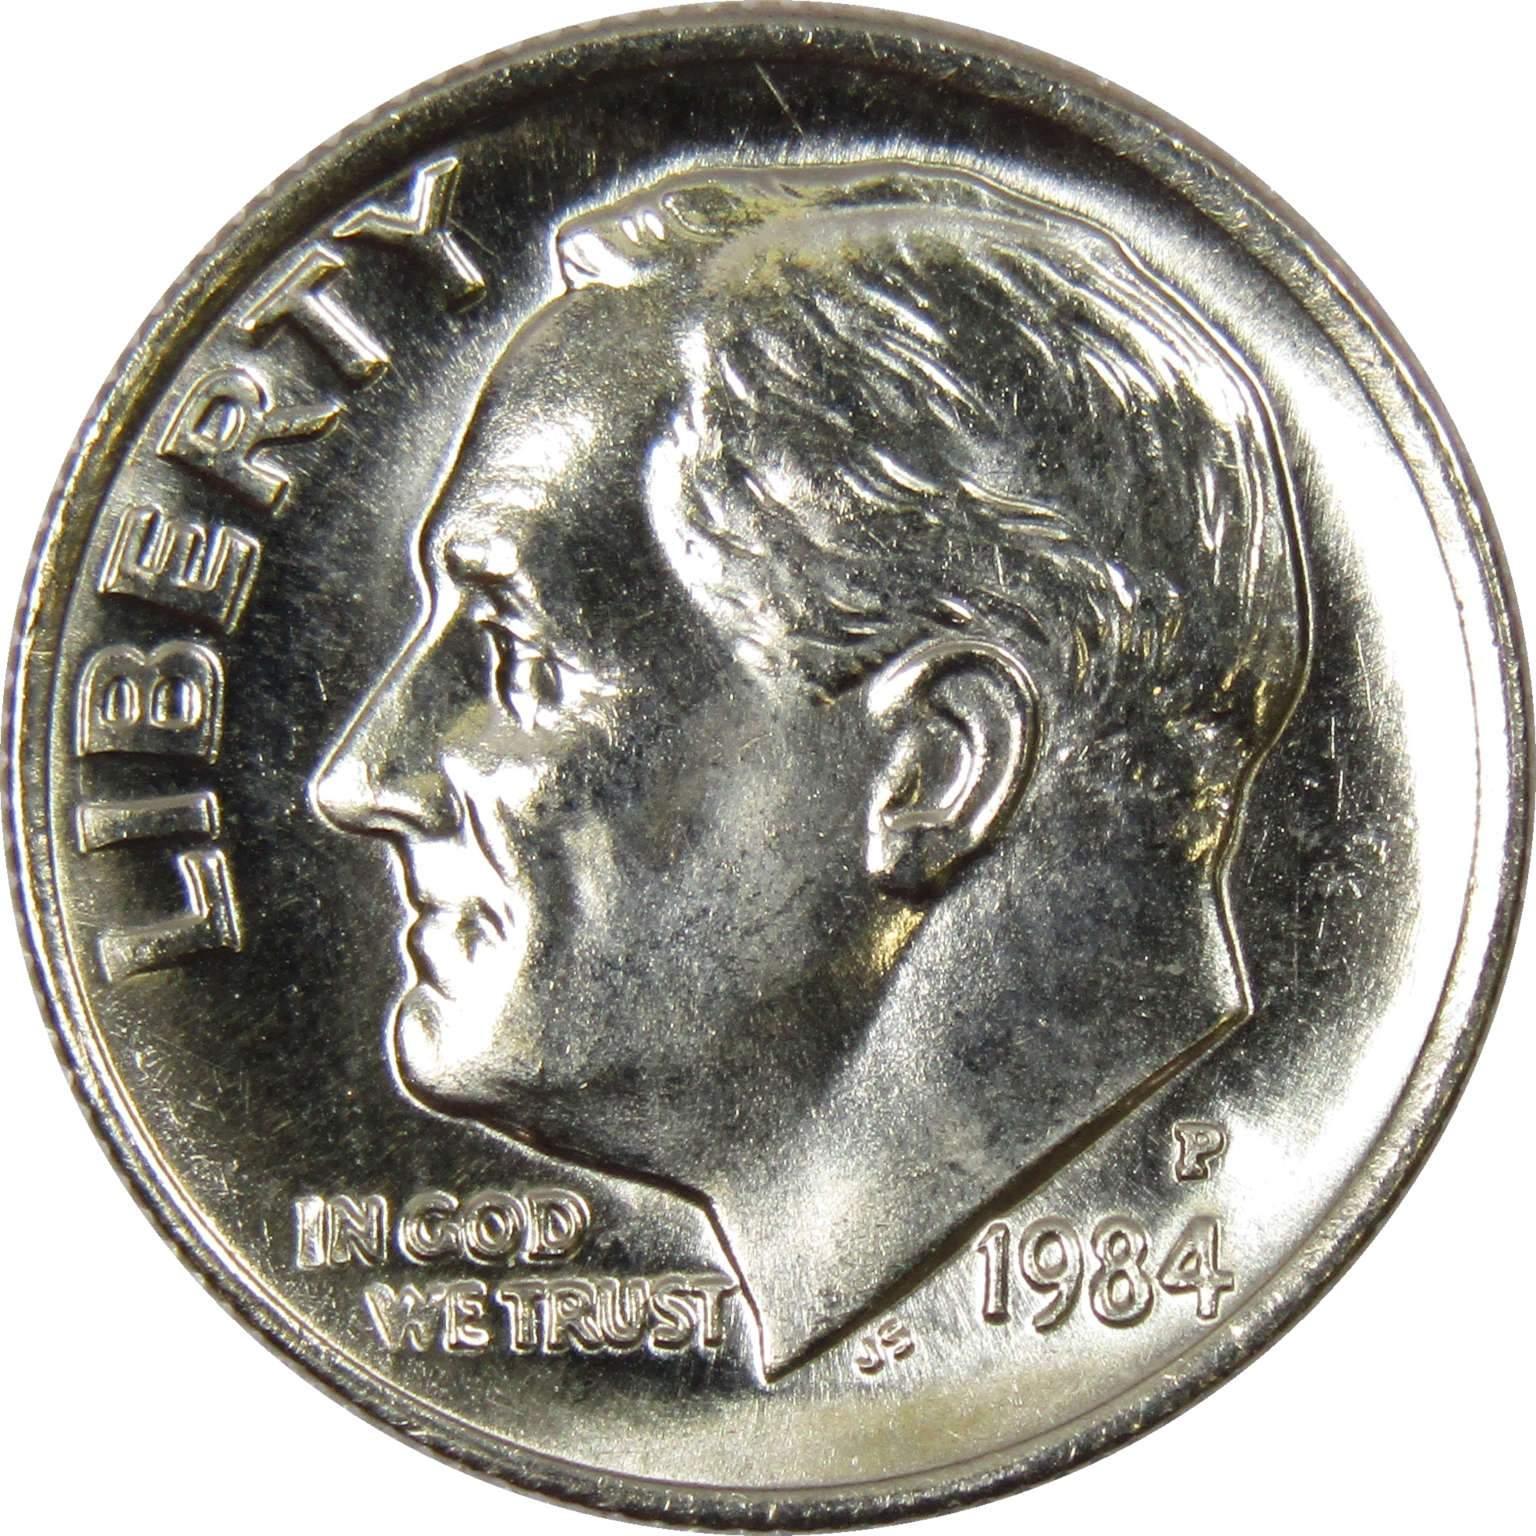 1984 P Roosevelt Dime BU Uncirculated Mint State 10c US Coin Collectible